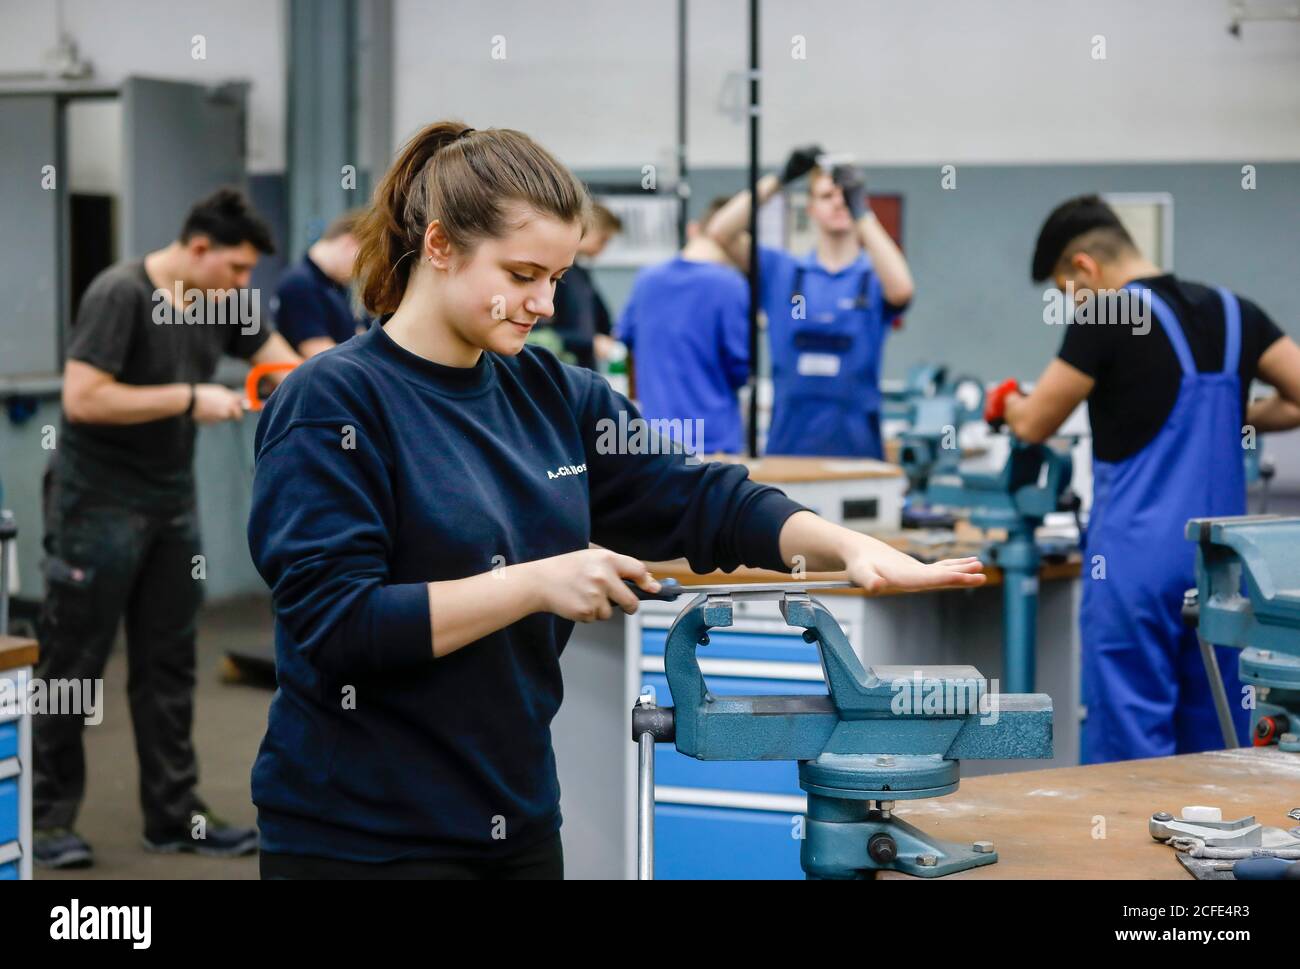 Remscheid, North Rhine-Westphalia, Germany - apprentices in metal professions here at the basic training, vocational training center of the Remscheid Stock Photo